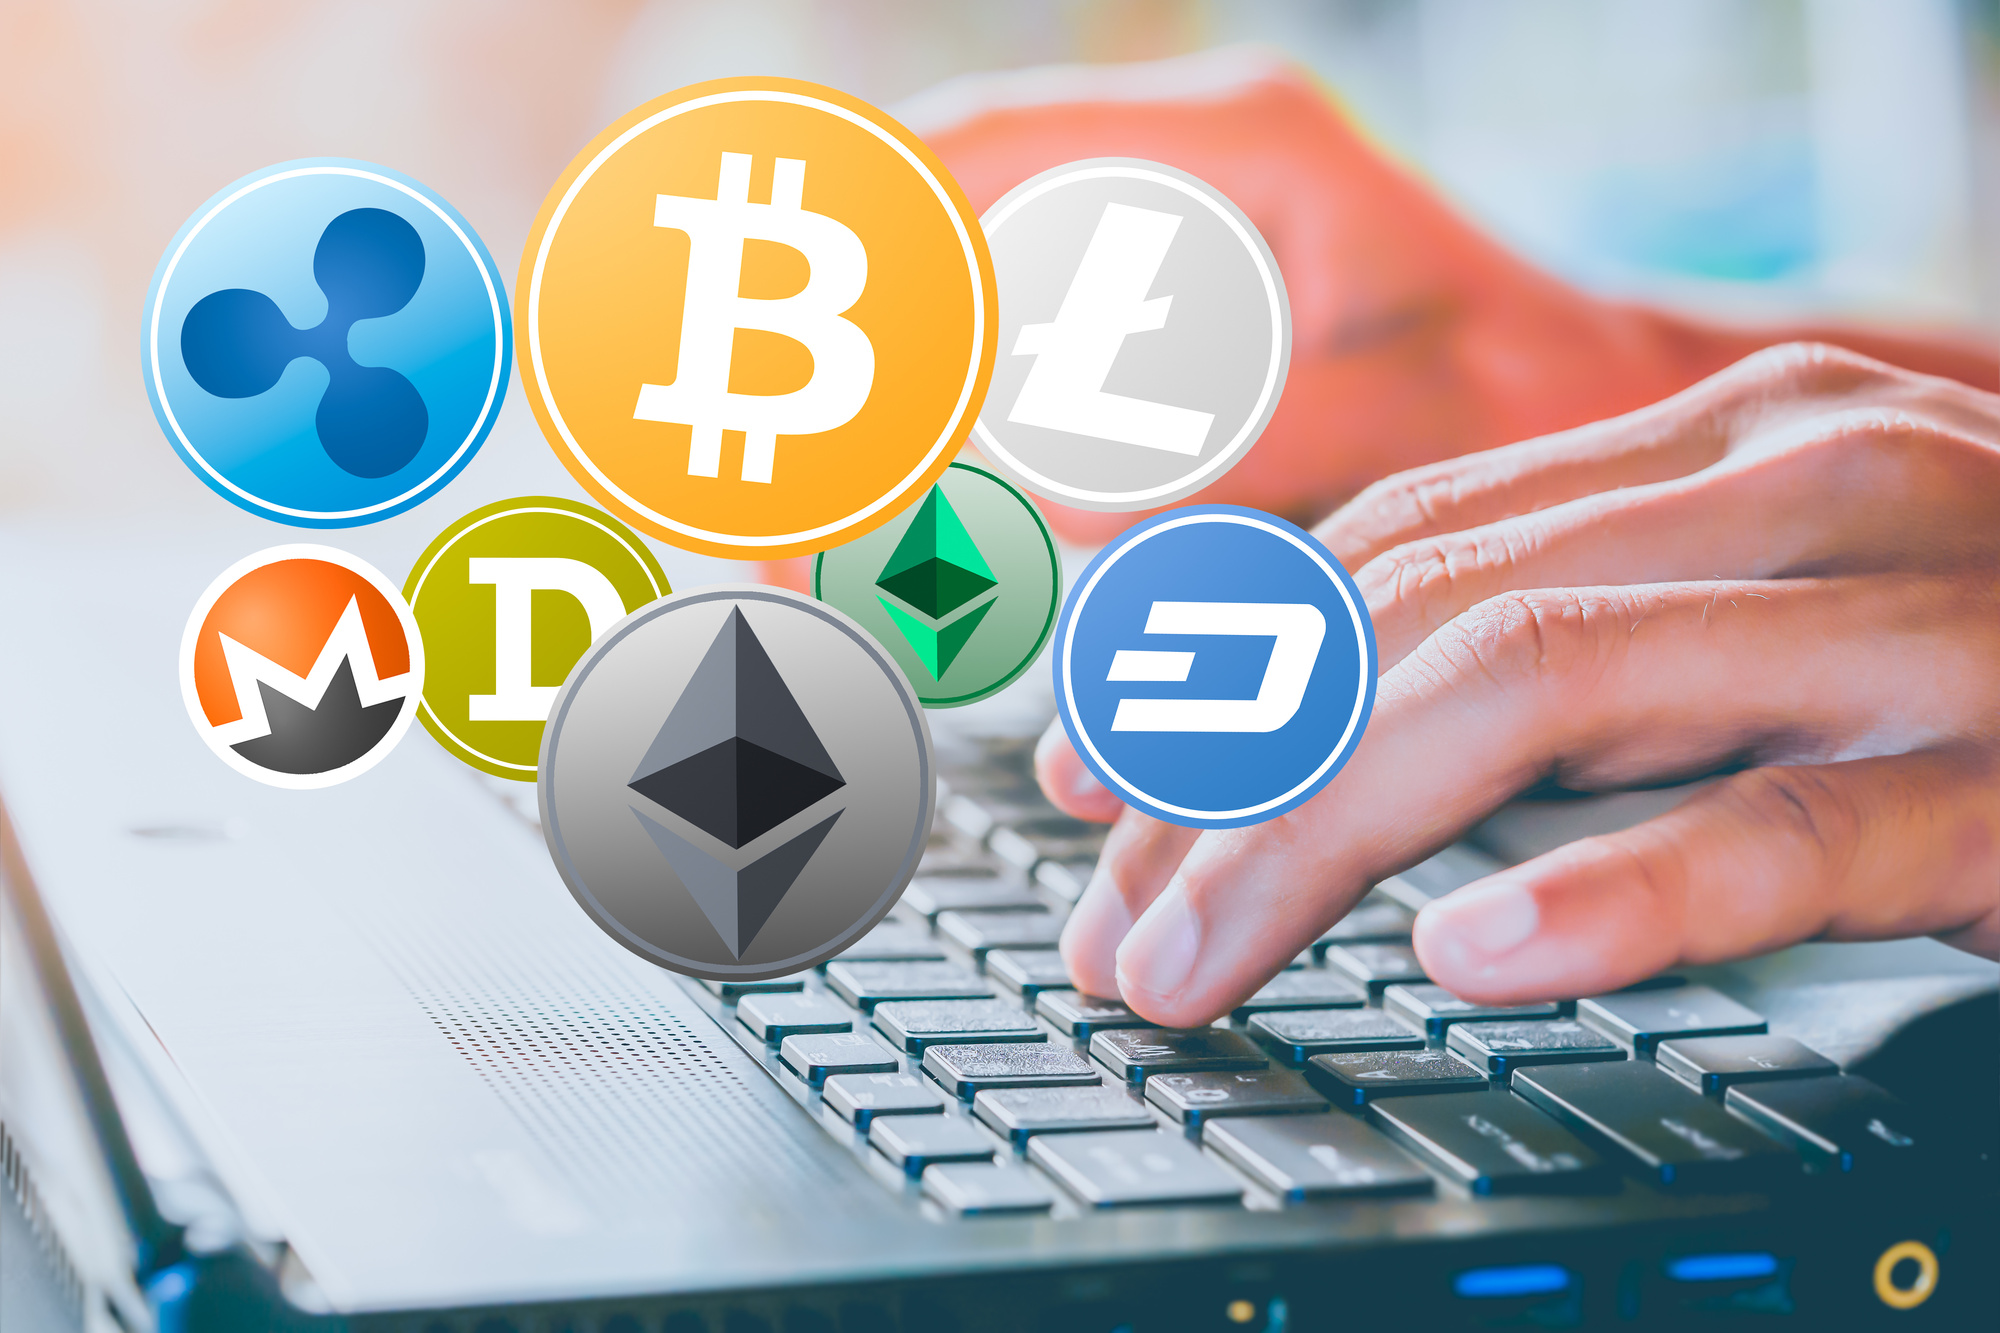 Making money through investments in cryptocurrencies requires knowing what not to do. Here are beginner cryptocurrency investment errors and how to avoid them.